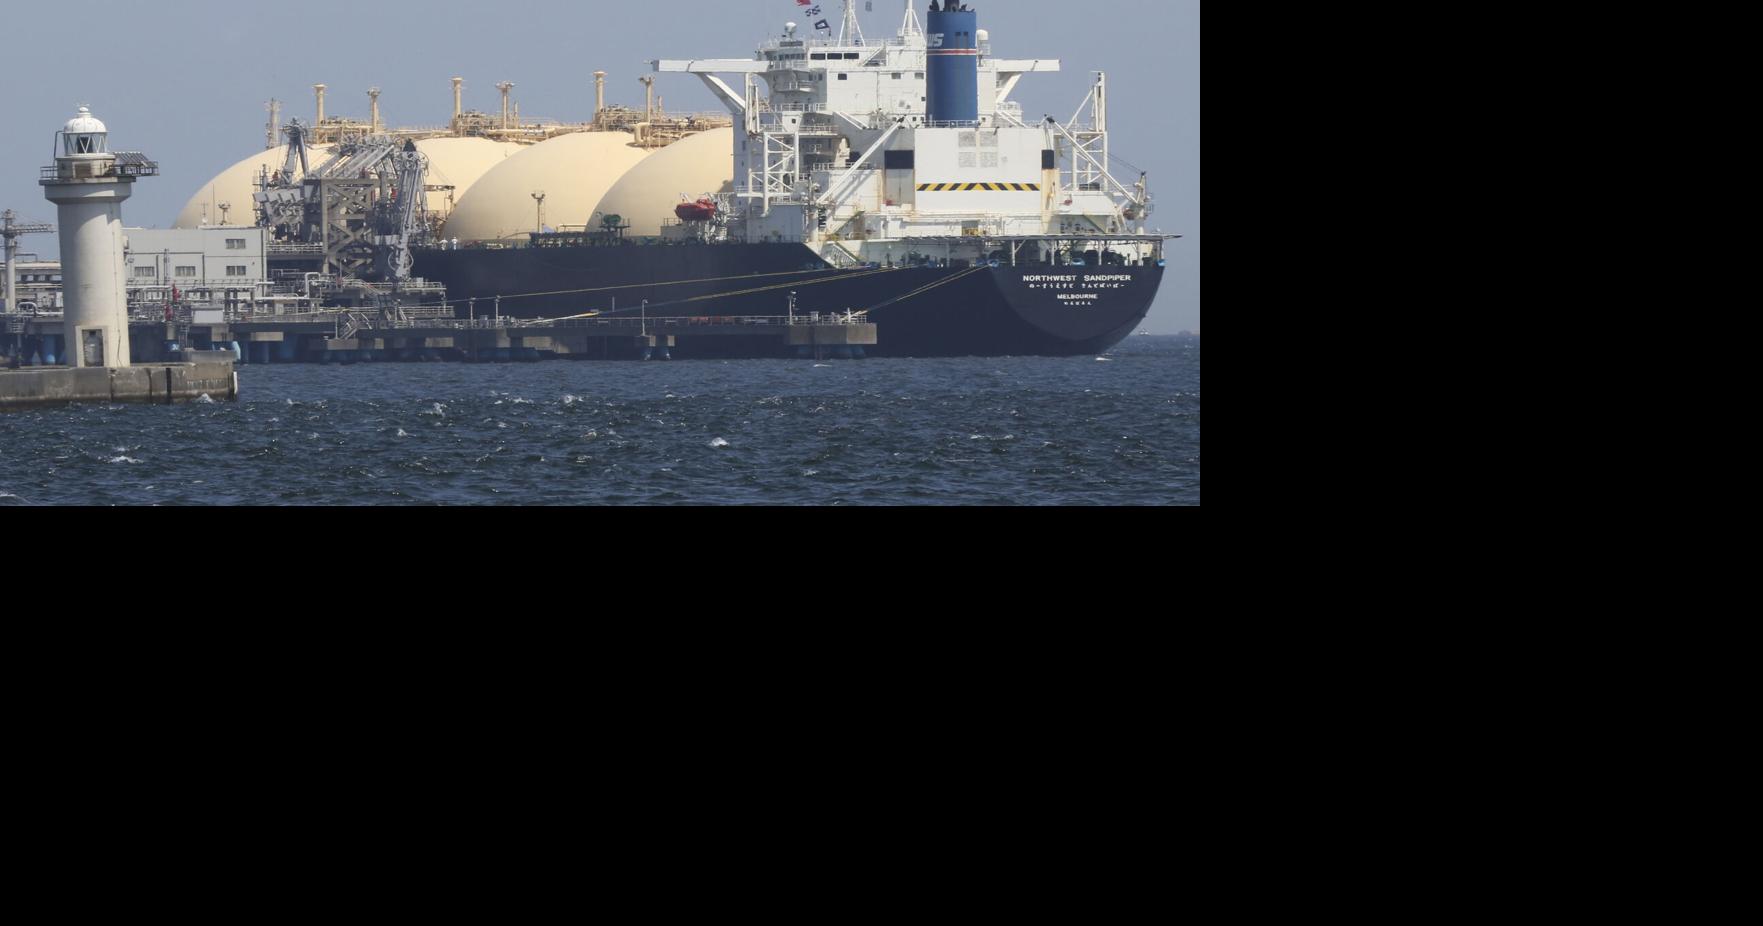 U.S. Department of Energy approves additional natural gas exports from Louisiana, Texas facilities